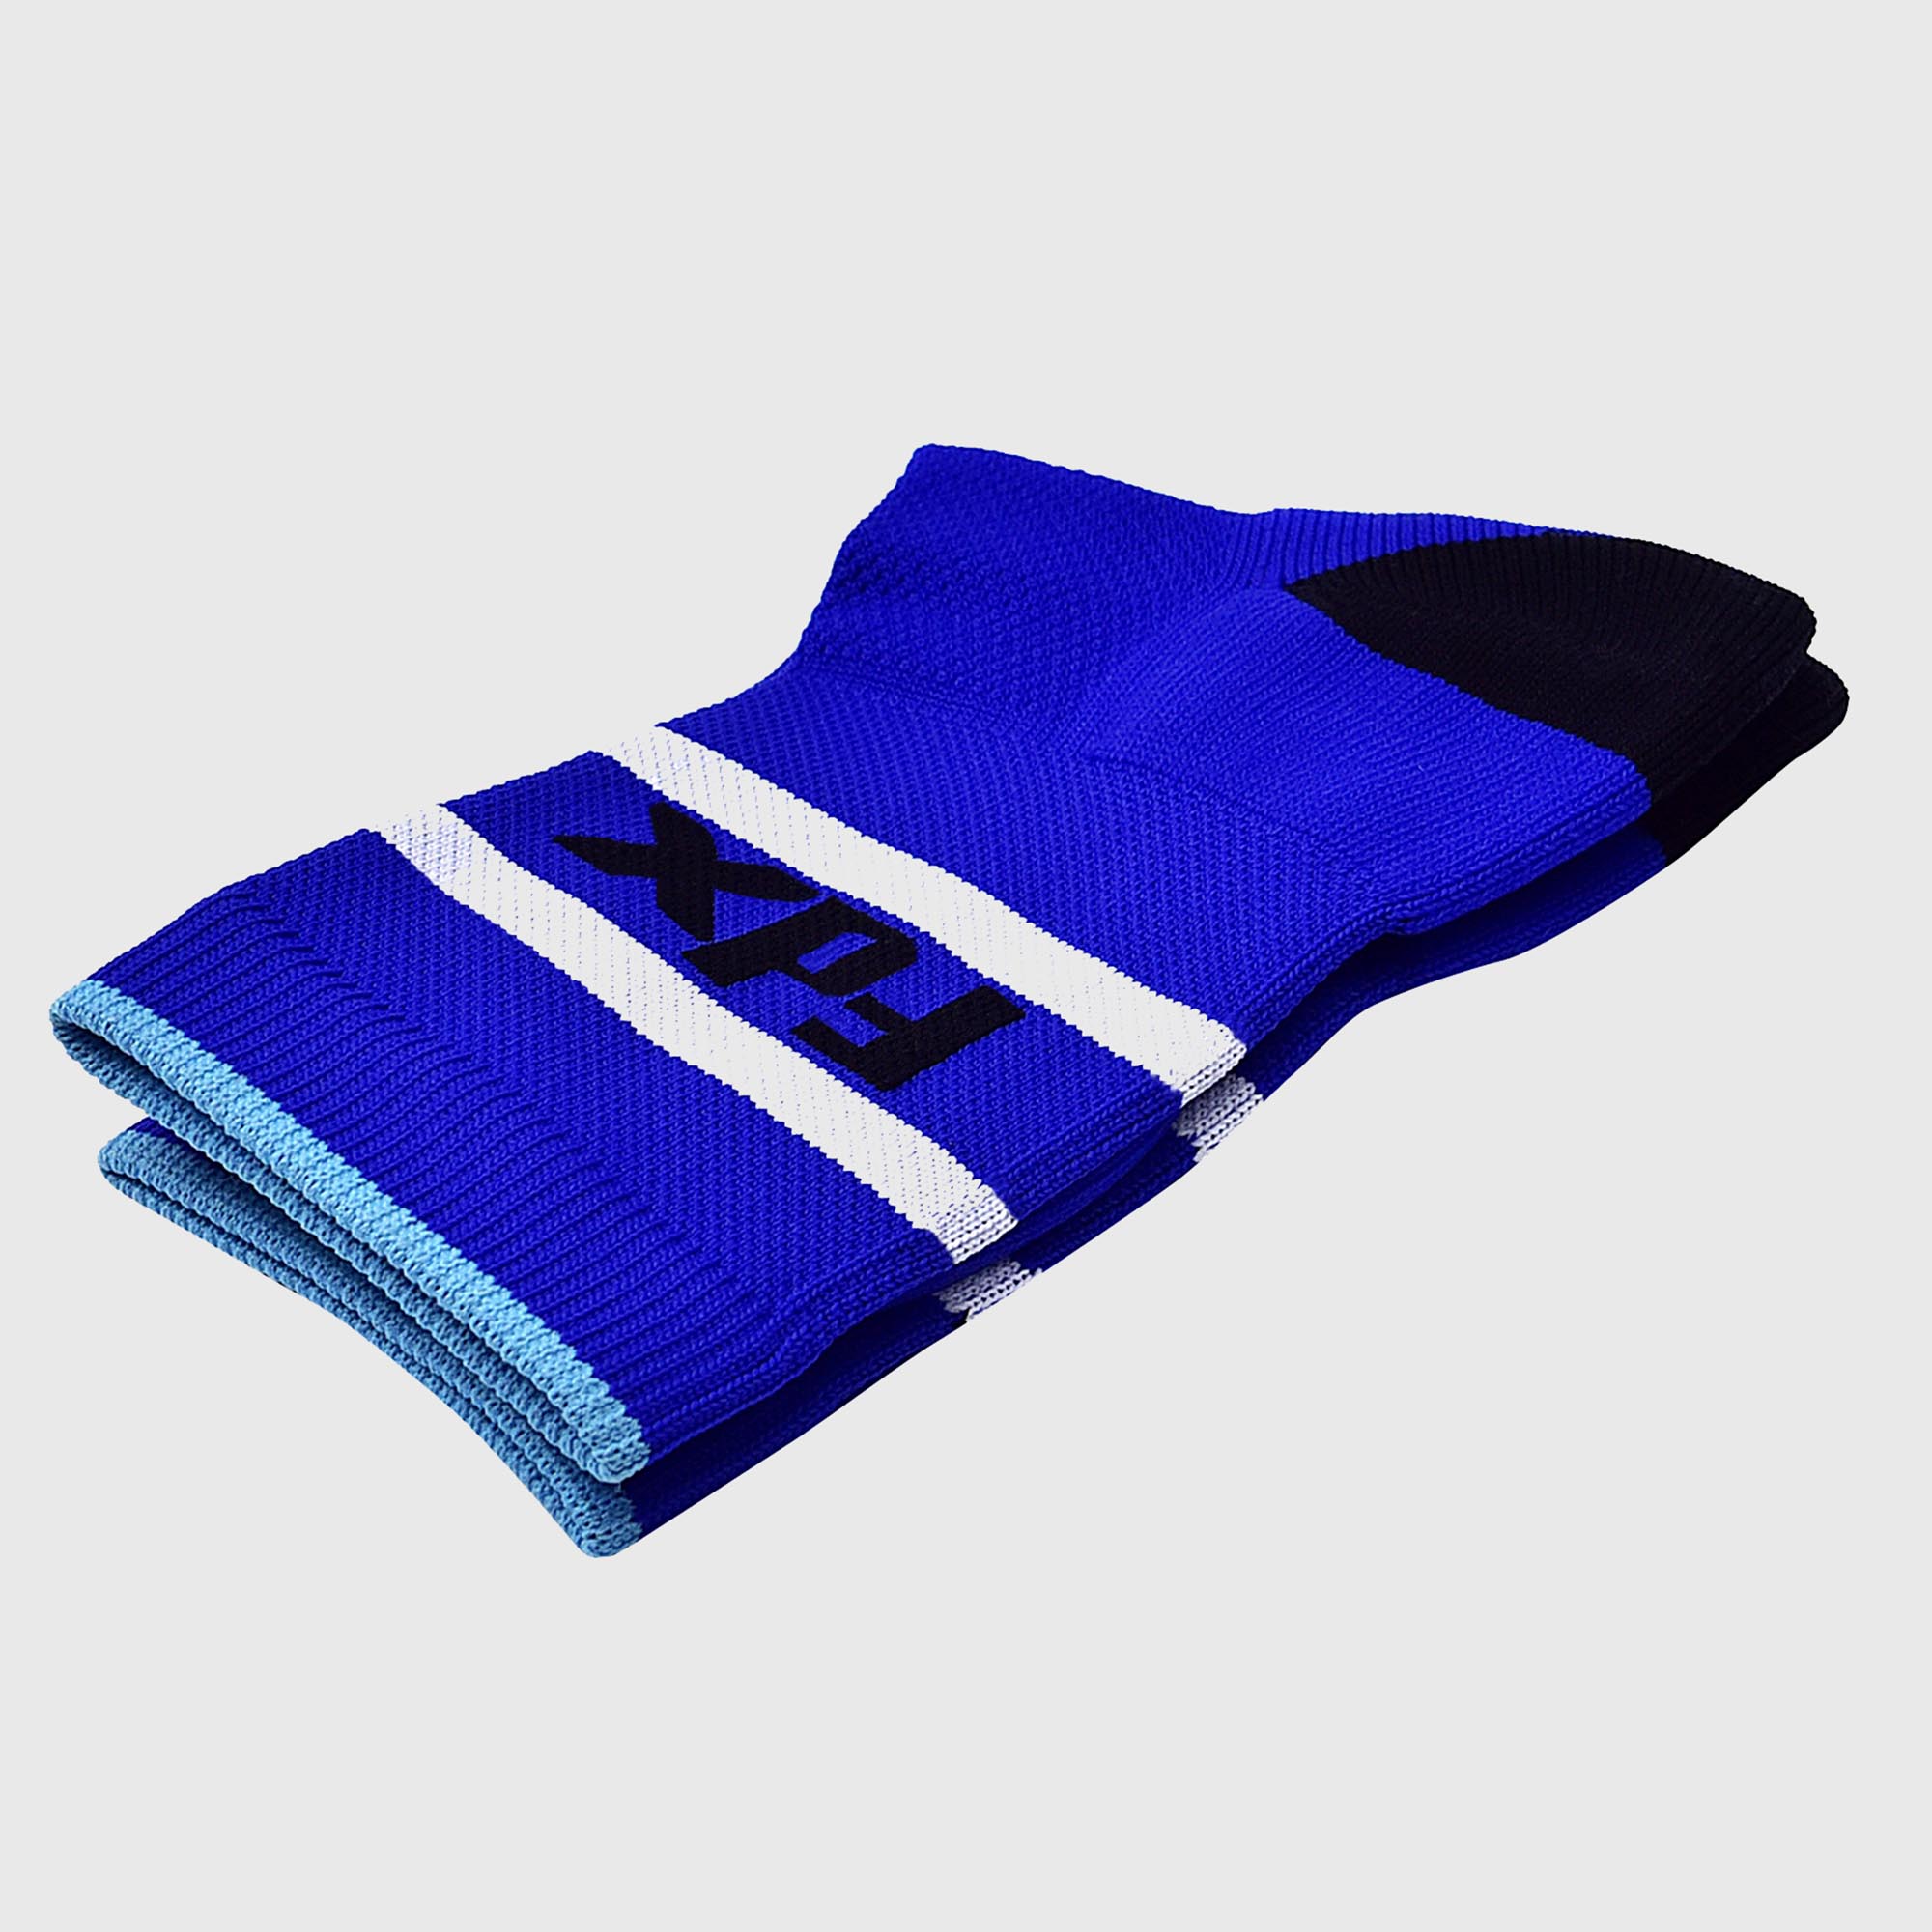 Fdx Blue Compression Socks for Cycling & Running